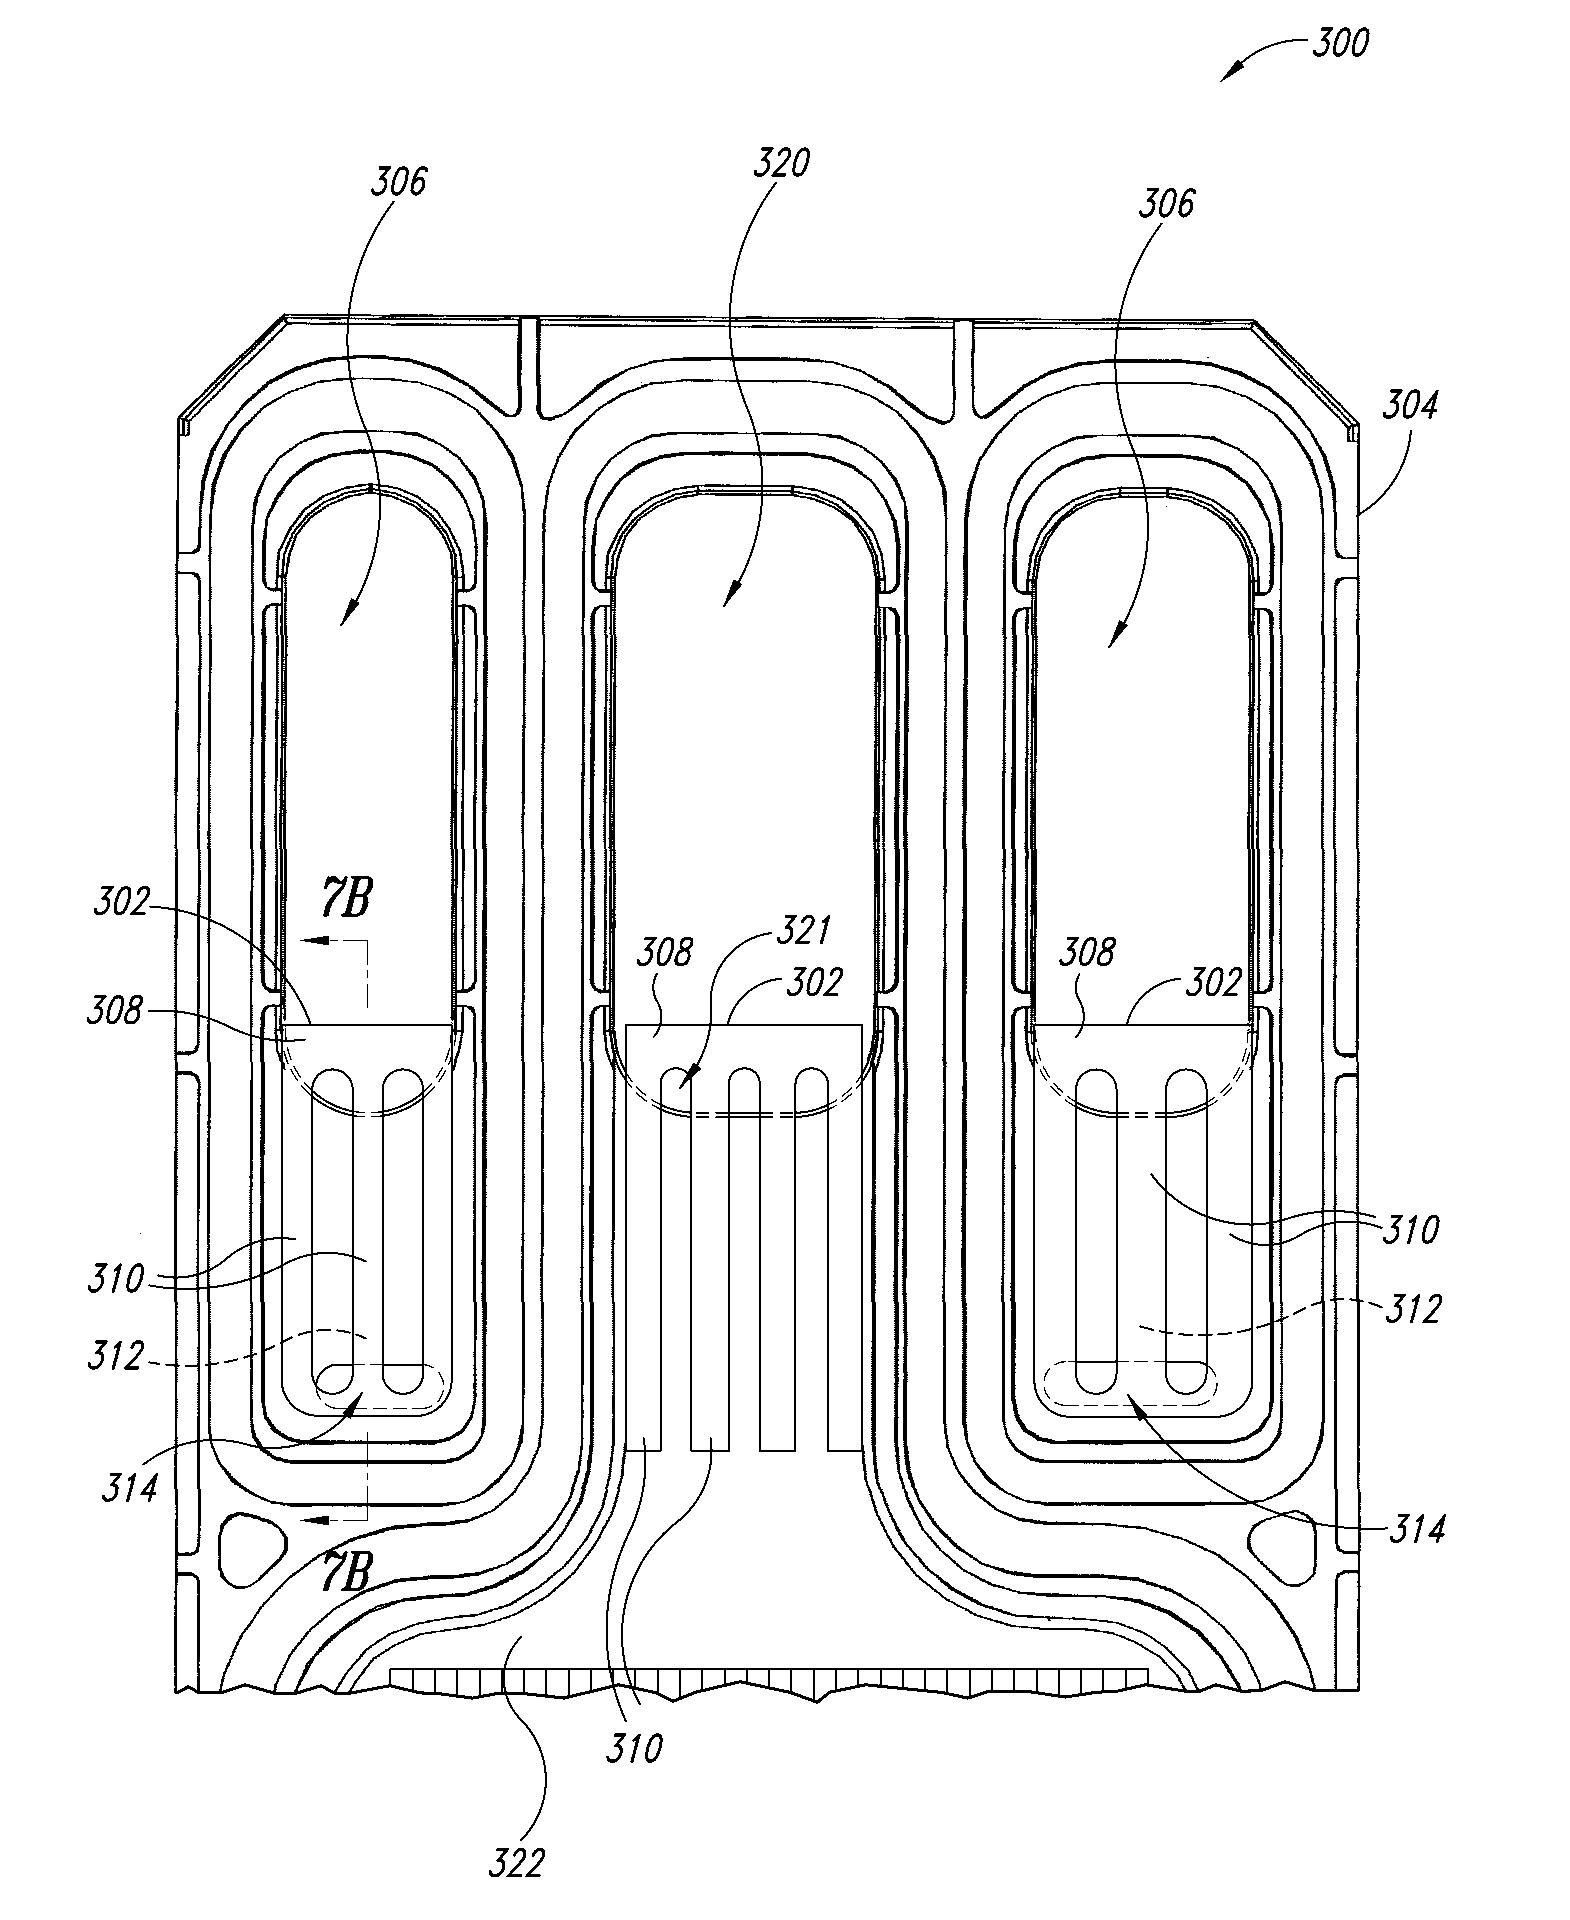 Apparatus and method for managing fluids in a fuel cell stack